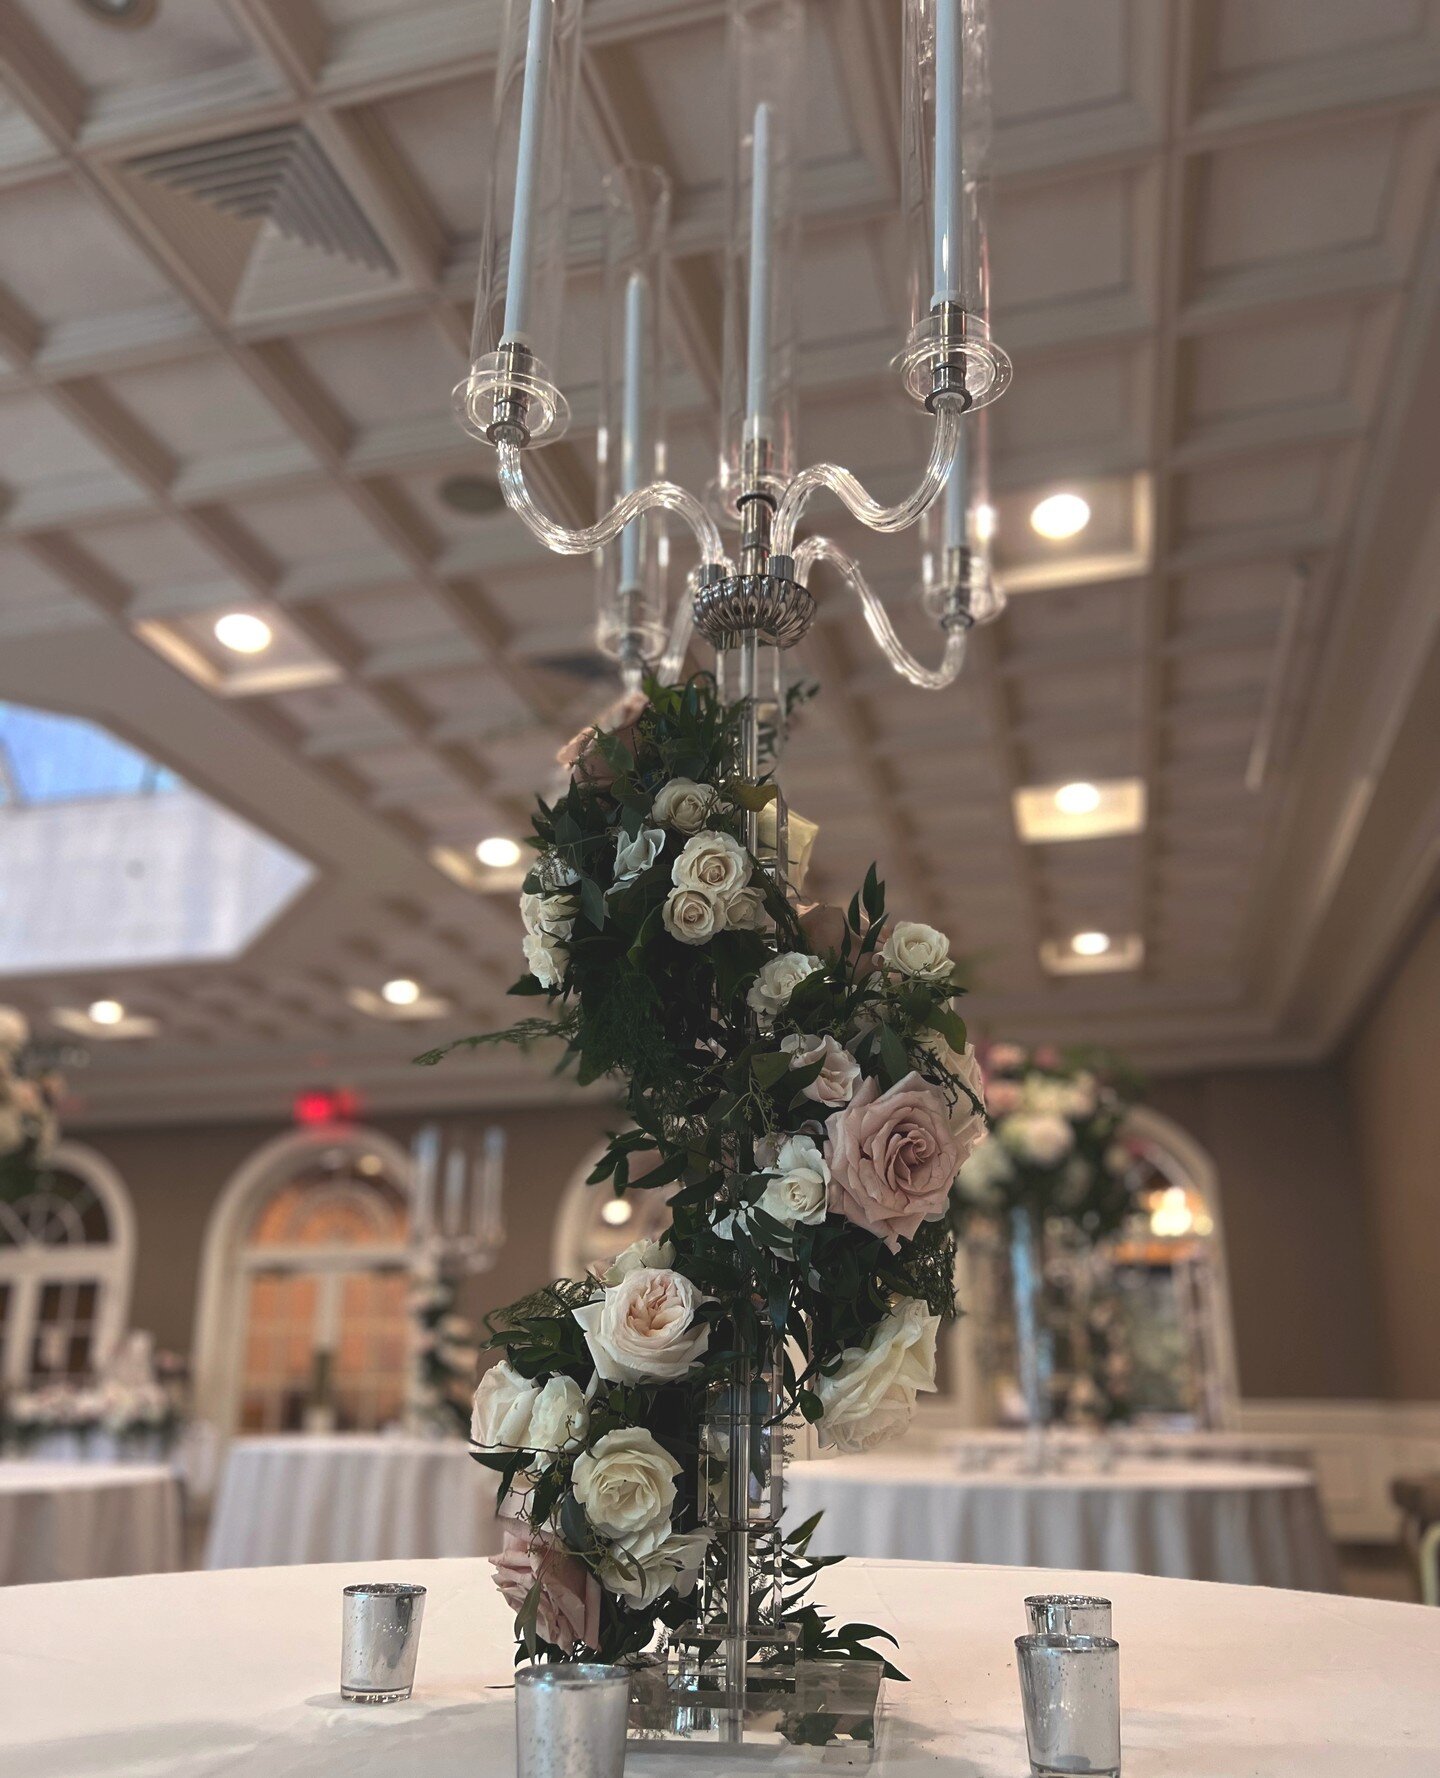 Classic venue, romantic candlelight, and of course, stunning blooms. What more can you ask for? 🤍 @gargiulosrestaurant @lynne_re_agent⁠
⁠
.⁠
.⁠
We can't wait to brainstorm with you &amp; bring your wedding vision to life!⁠ Click the link in our bio 